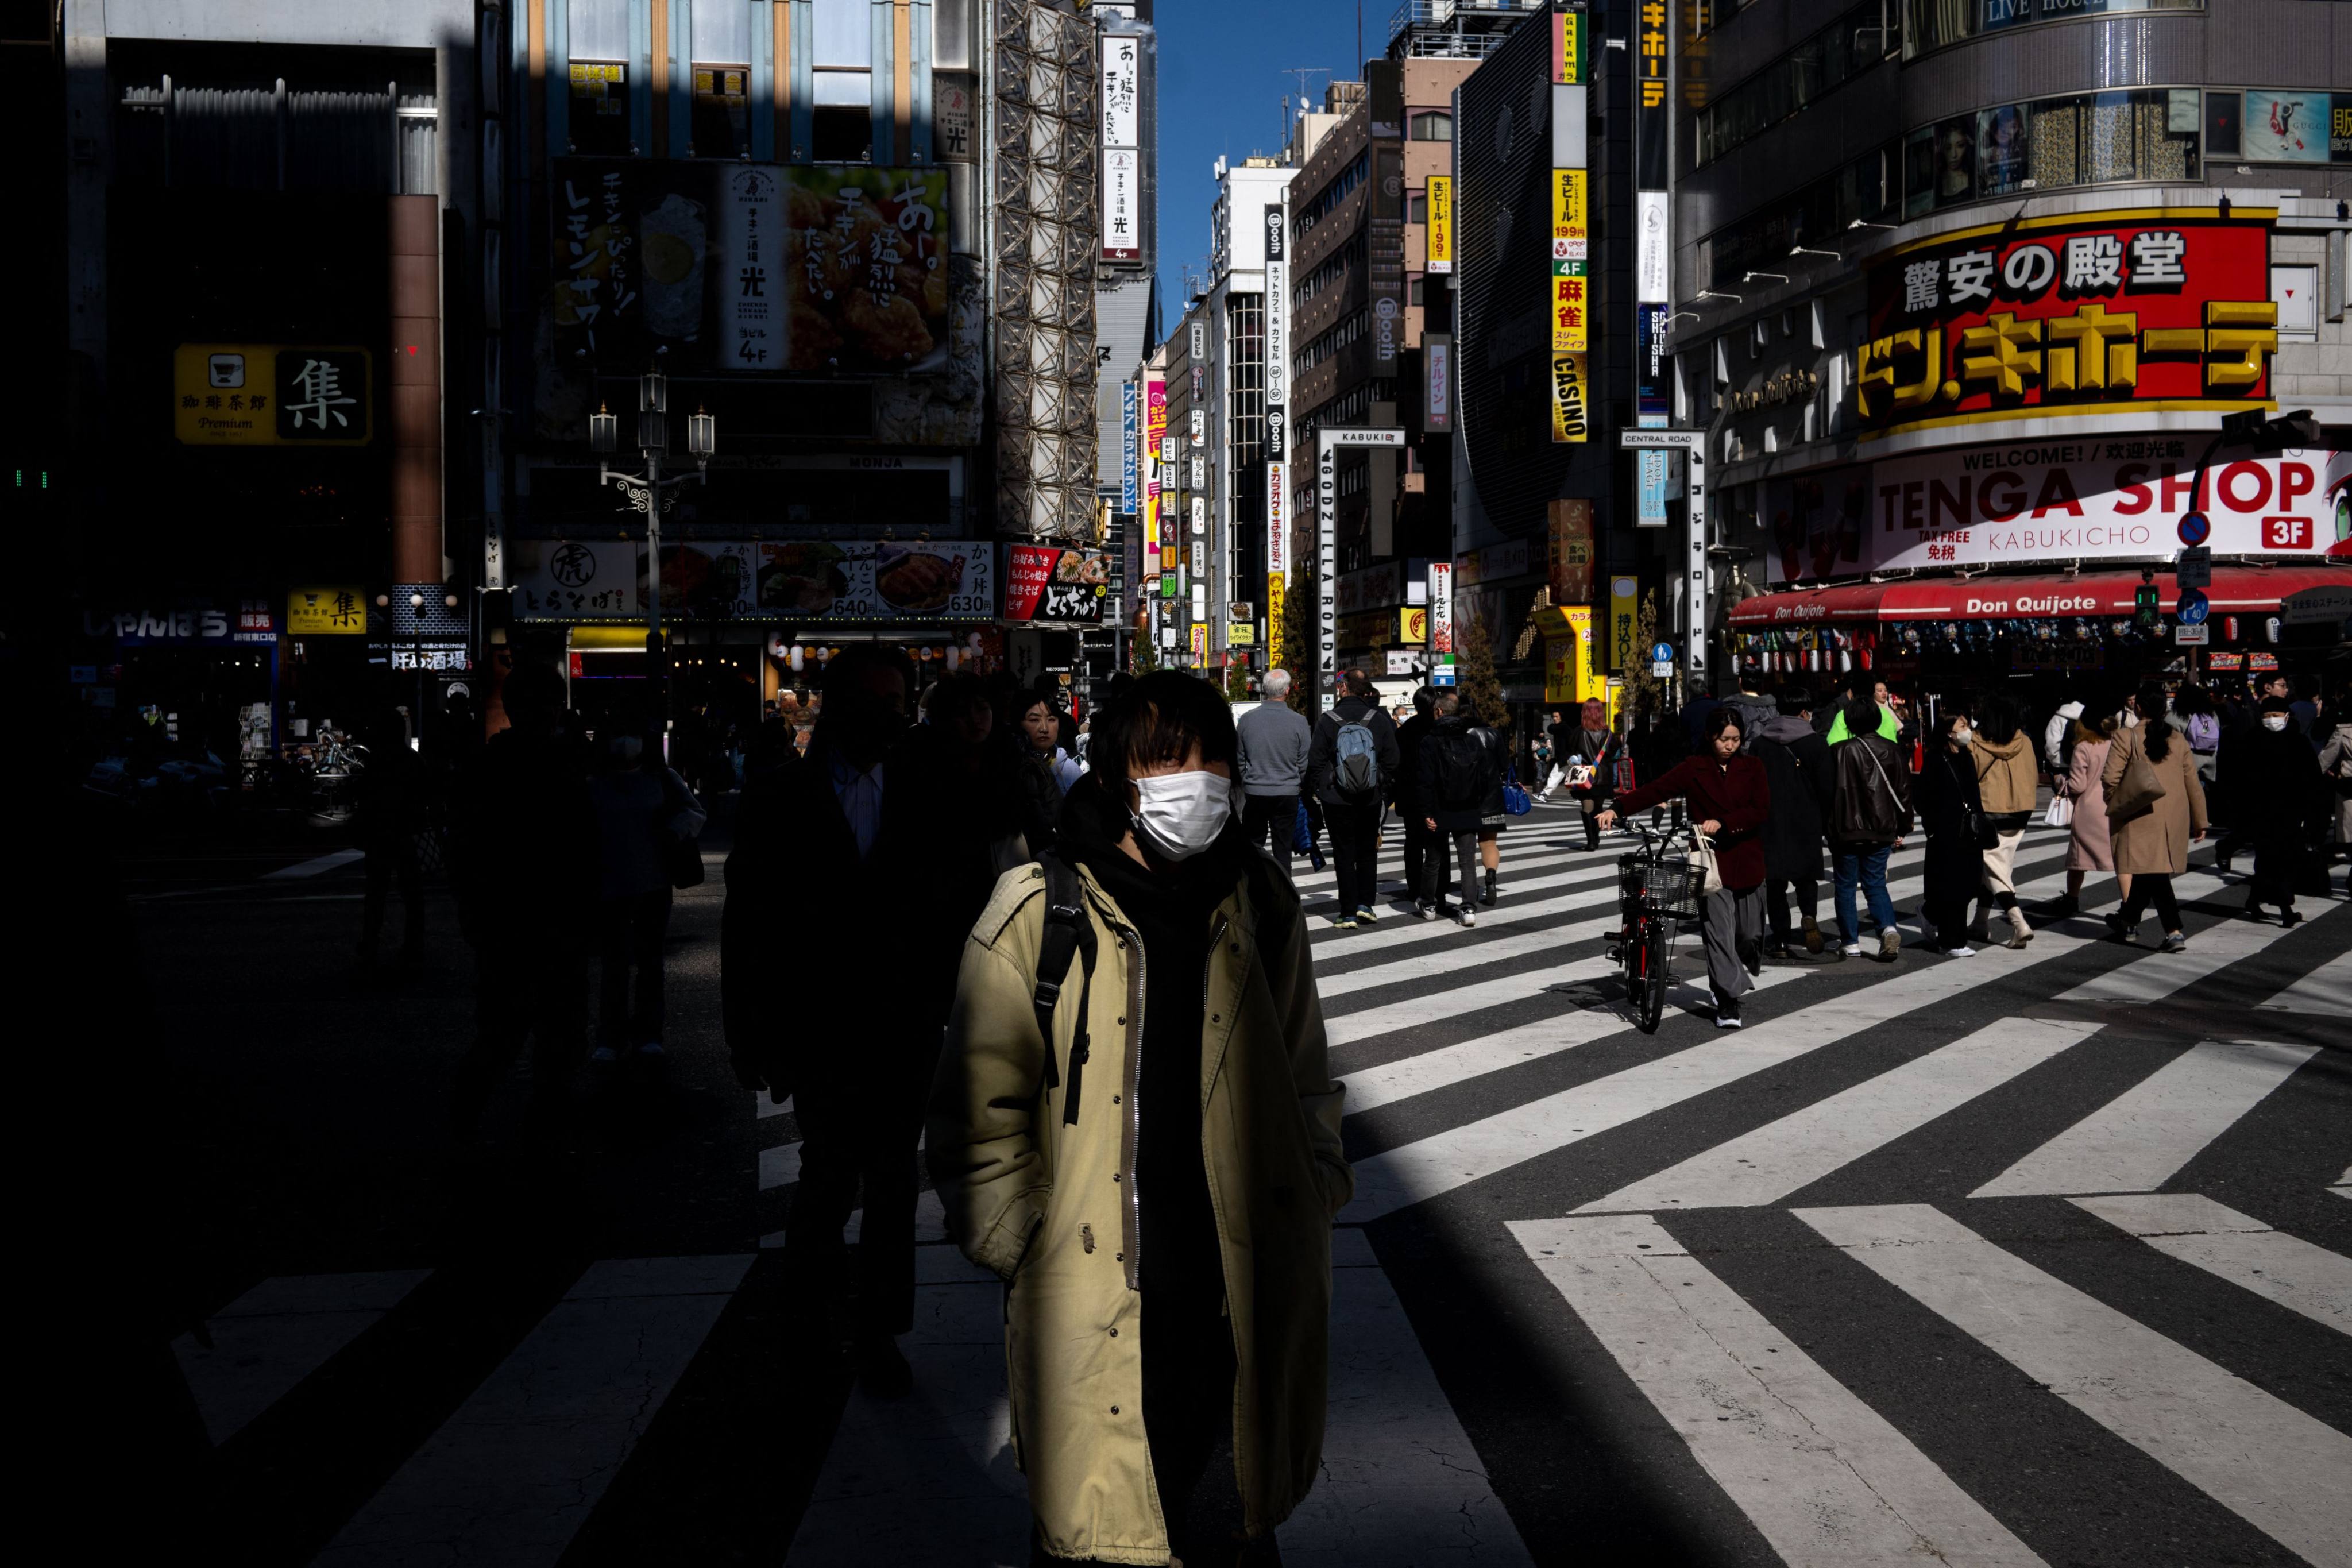 Pedestrians walk in Shinjuku district of Tokyo. The government has maintained that Japan is not in a state of deflation, but has yet to officially declare its end. Photo: AFP